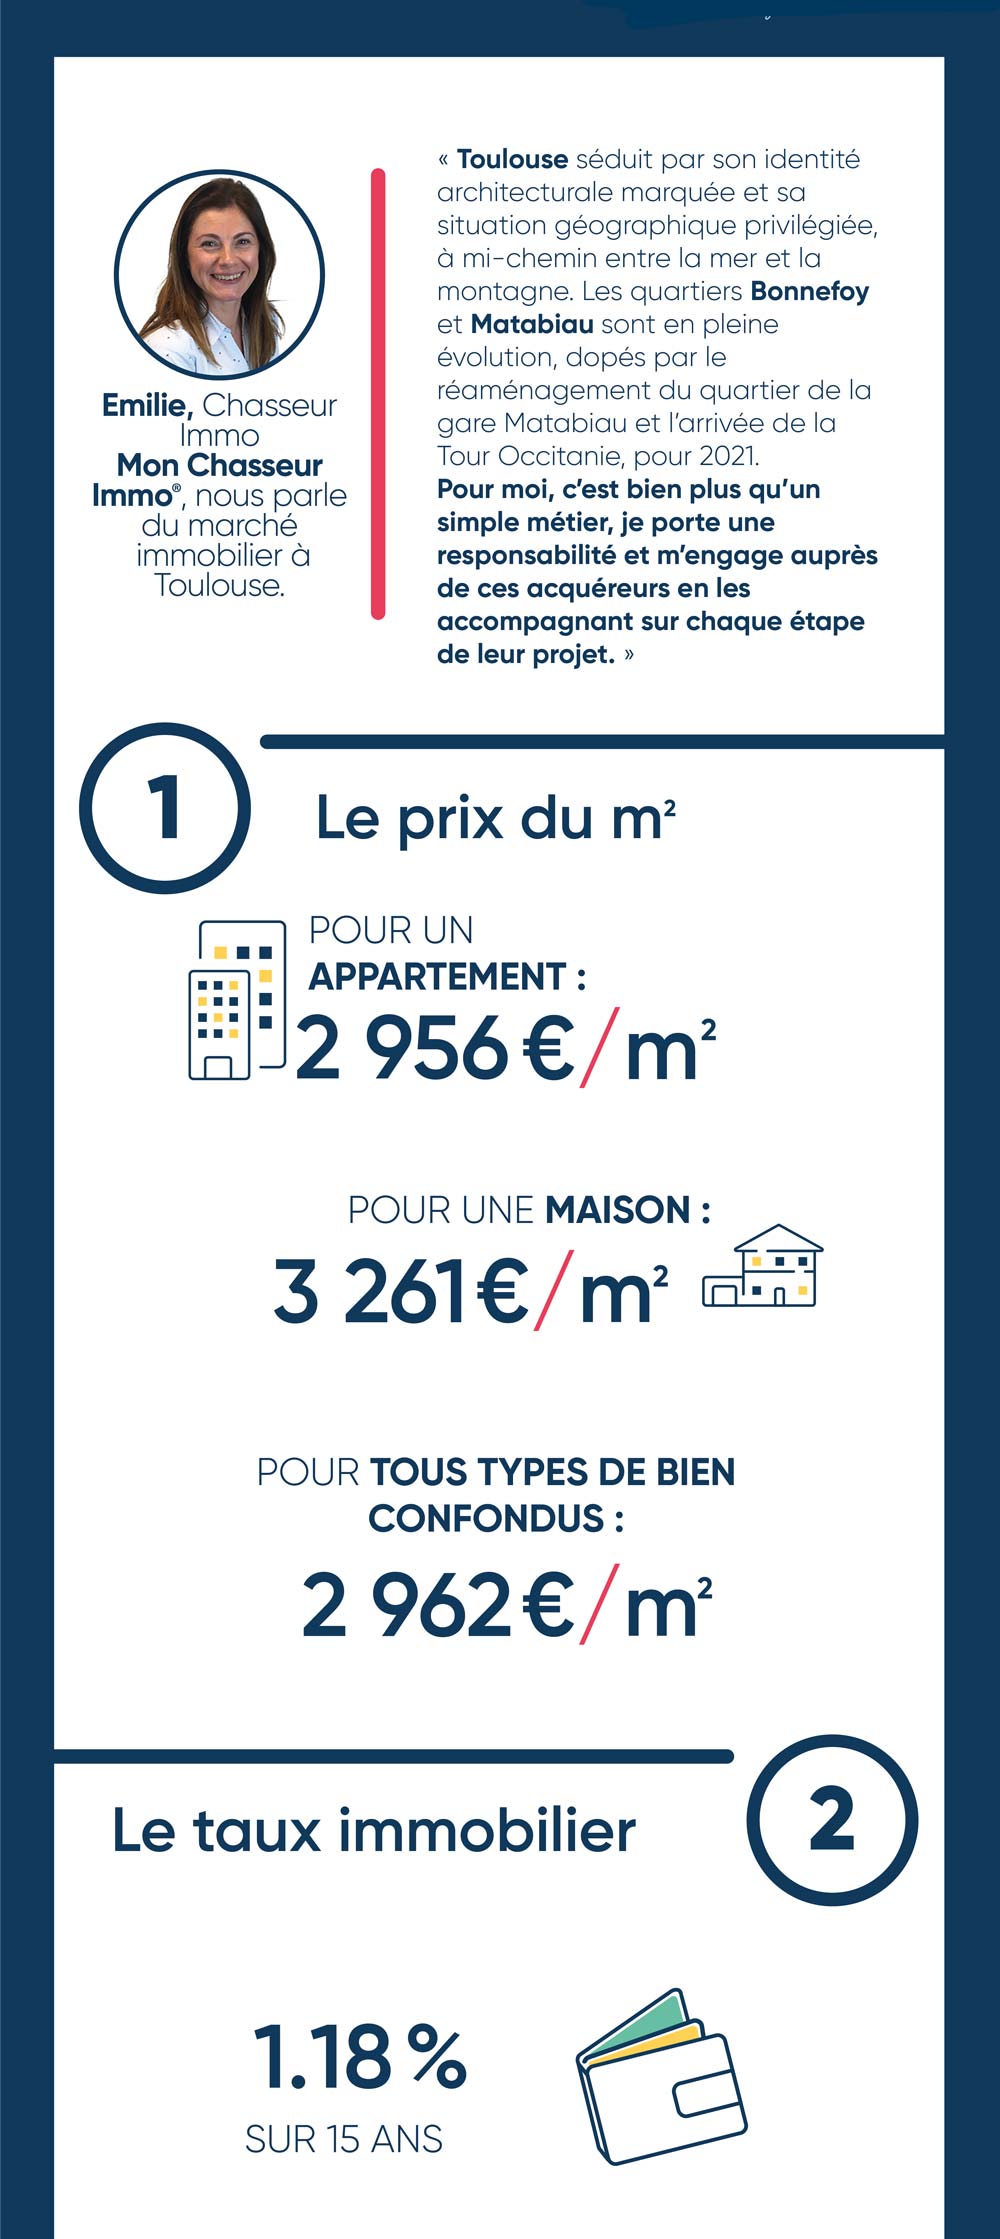 infographie immobilier Toulouse partie 1